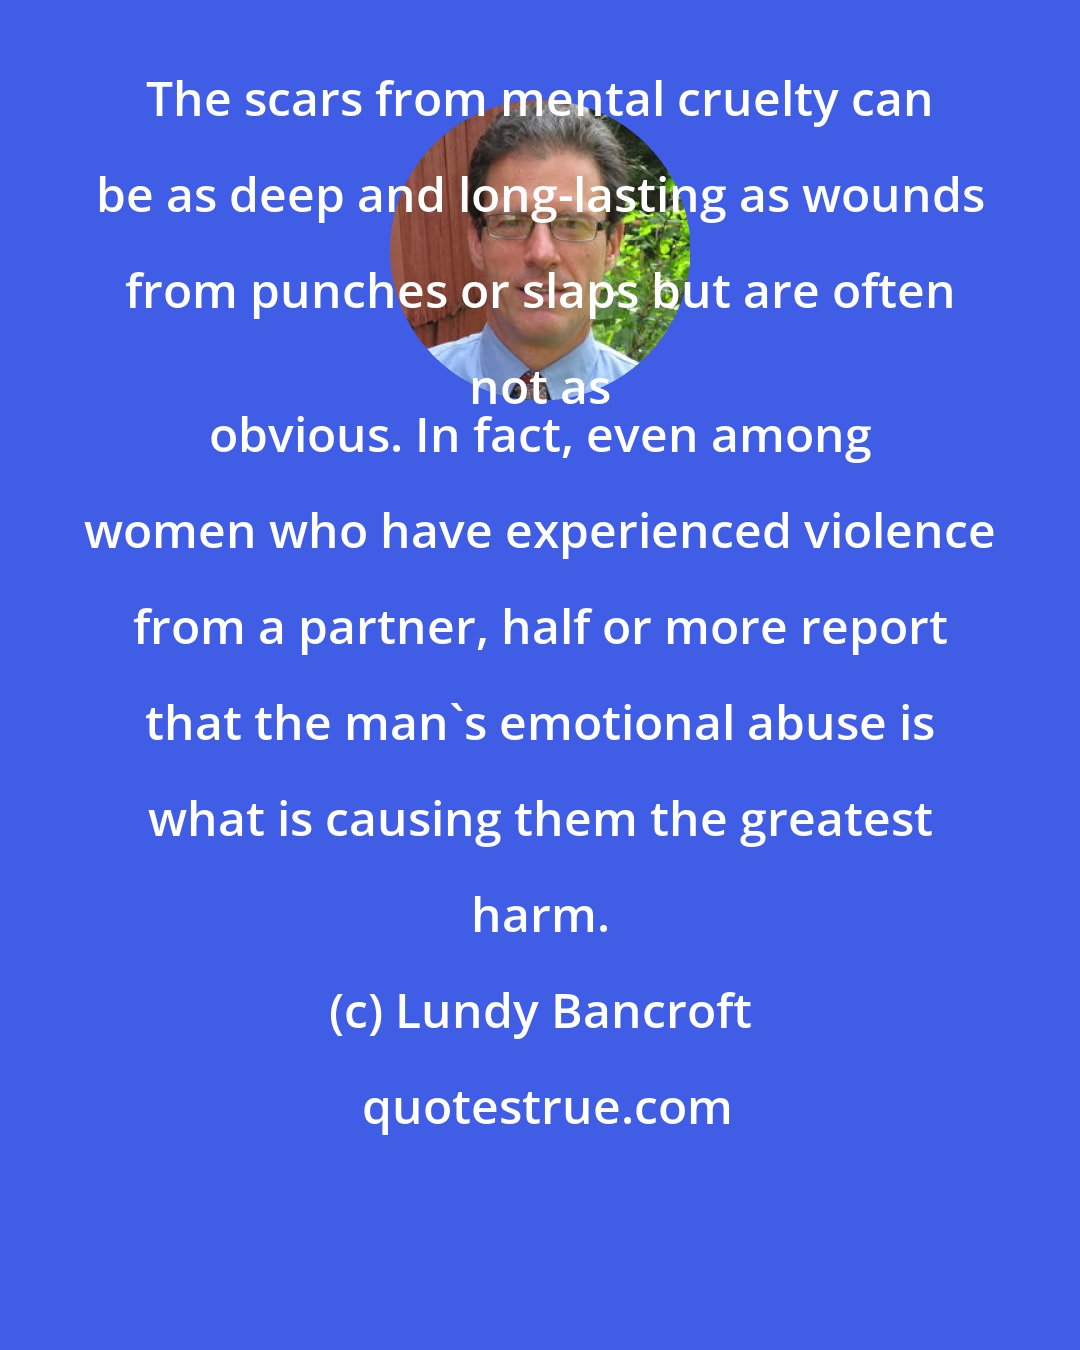 Lundy Bancroft: The scars from mental cruelty can be as deep and long-lasting as wounds from punches or slaps but are often not as 
 obvious. In fact, even among women who have experienced violence from a partner, half or more report that the man's emotional abuse is what is causing them the greatest harm.